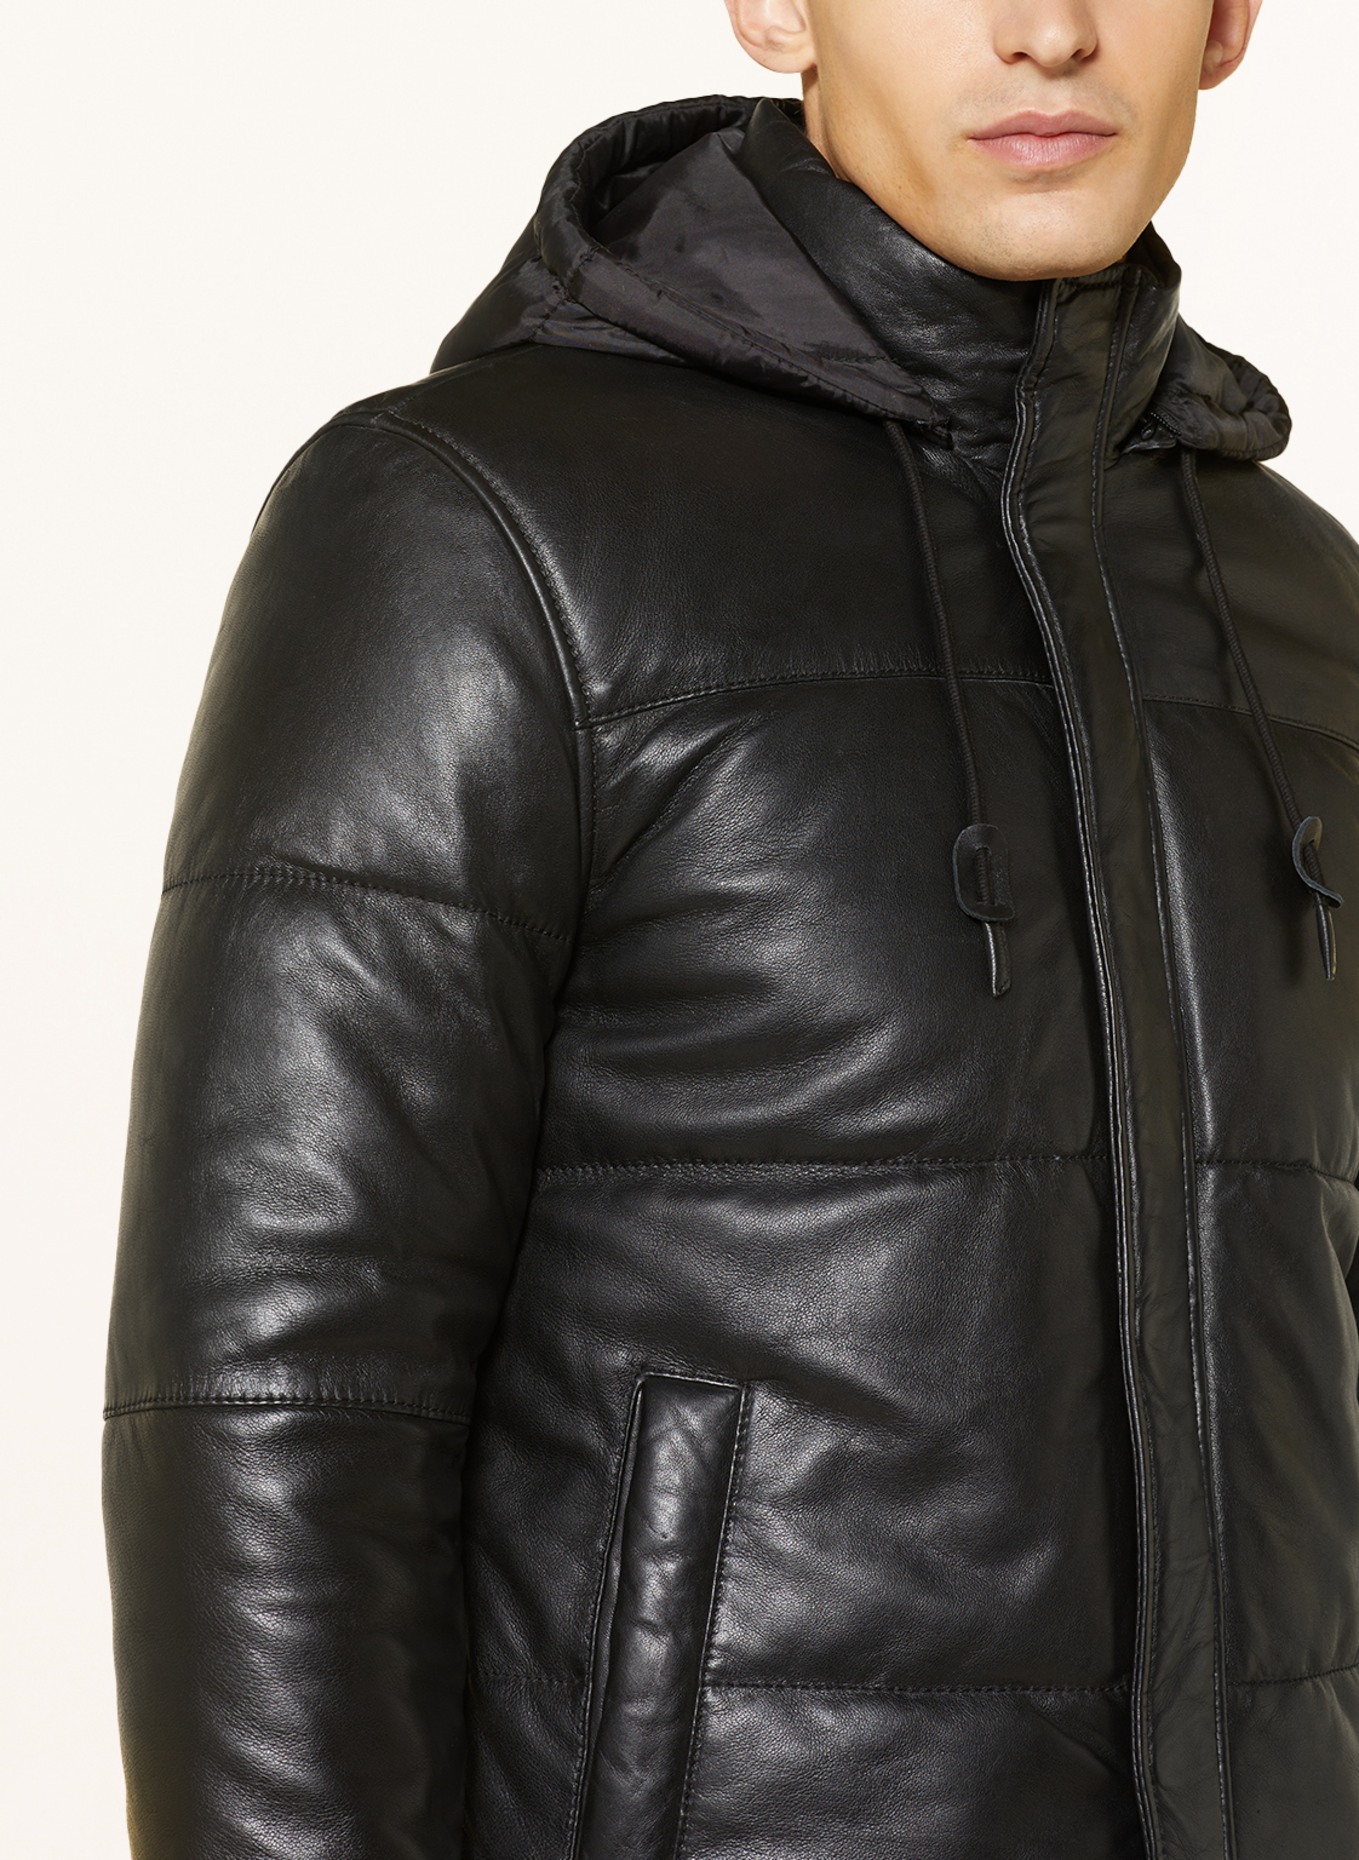 in hood black gipsy GMDULE jacket detachable with Leather